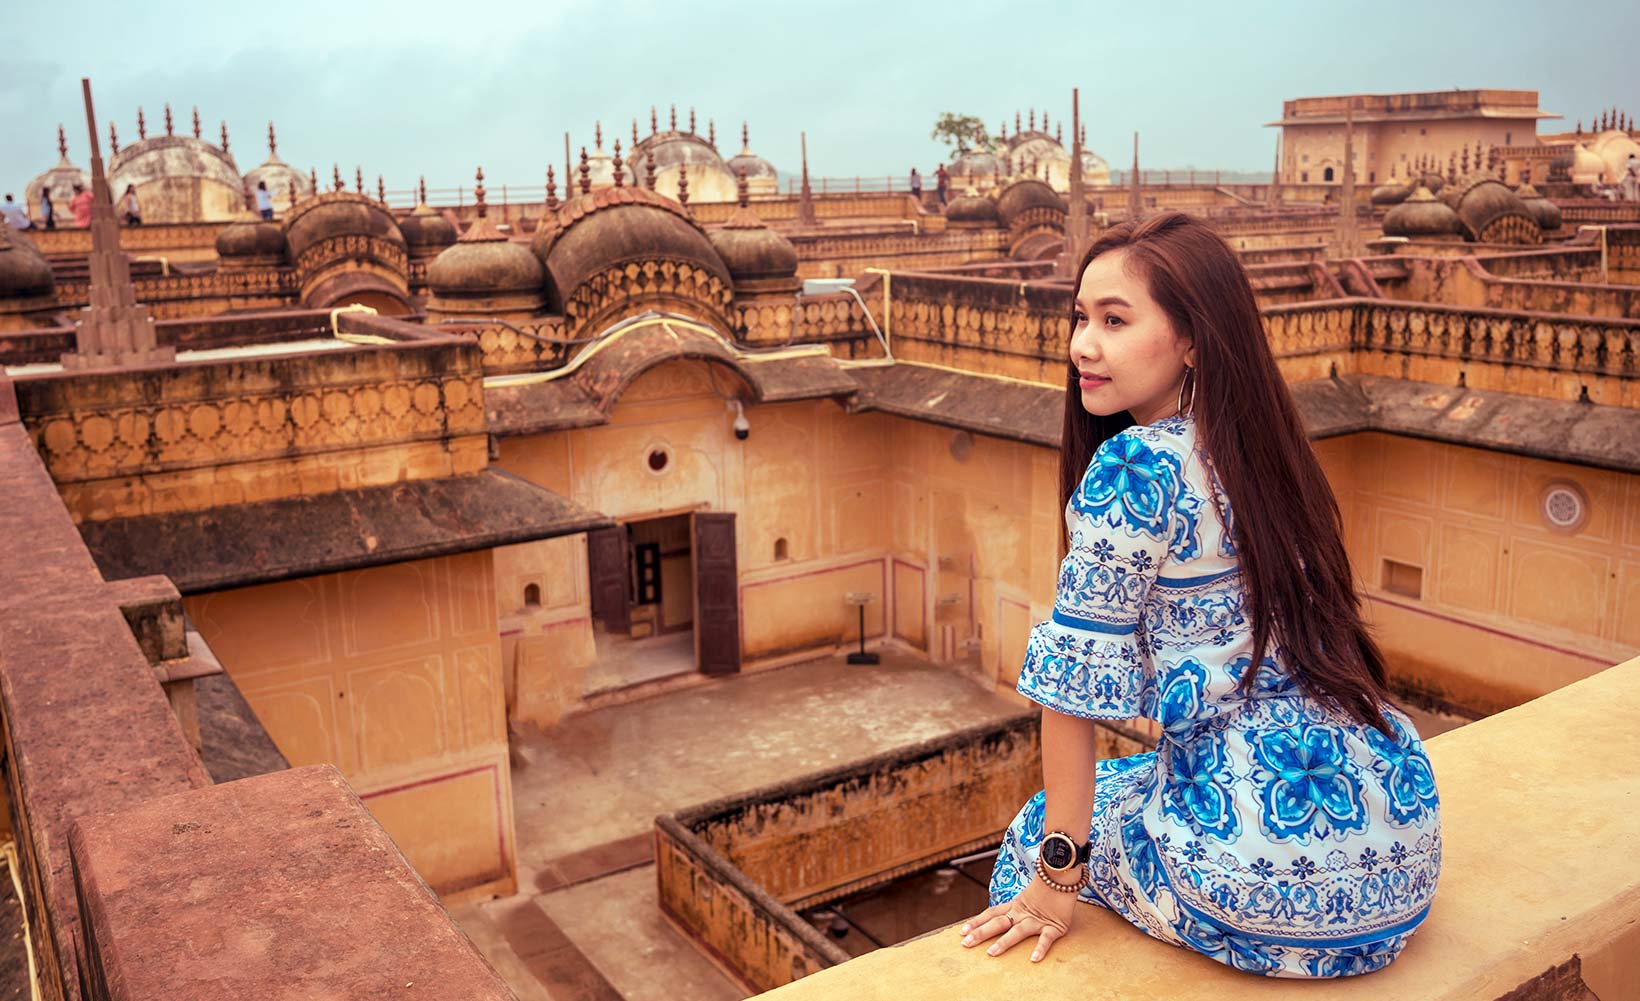 10 Things You Didn’t Know About Jaipur